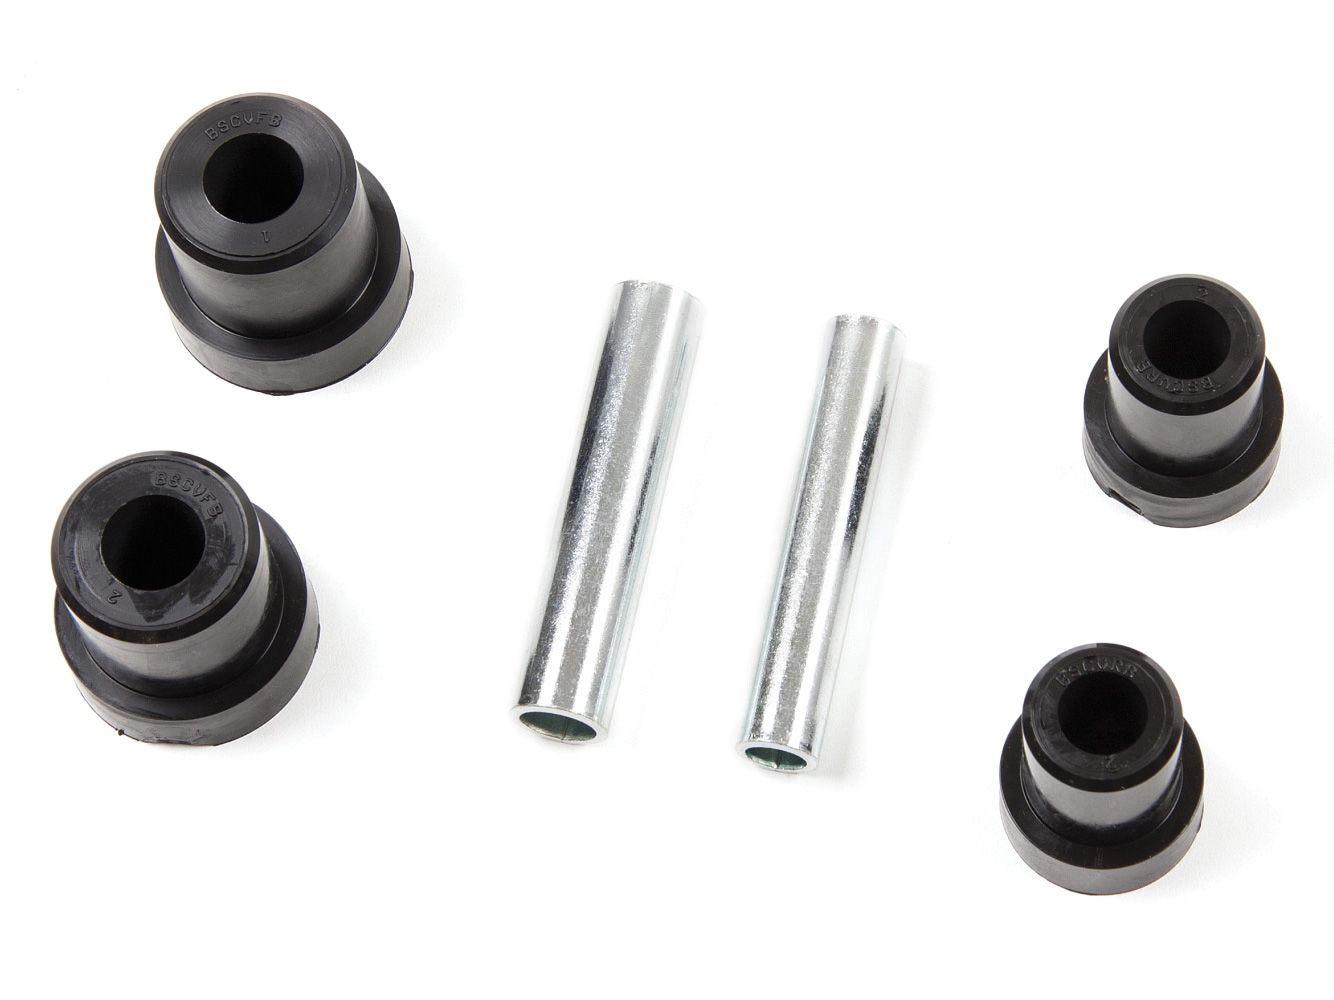 Jimmy & Suburban 1/2, 3/4 ton 1973-1987 GMC 4WD Front Leaf Spring Bushing Kit by Zone Off-Road